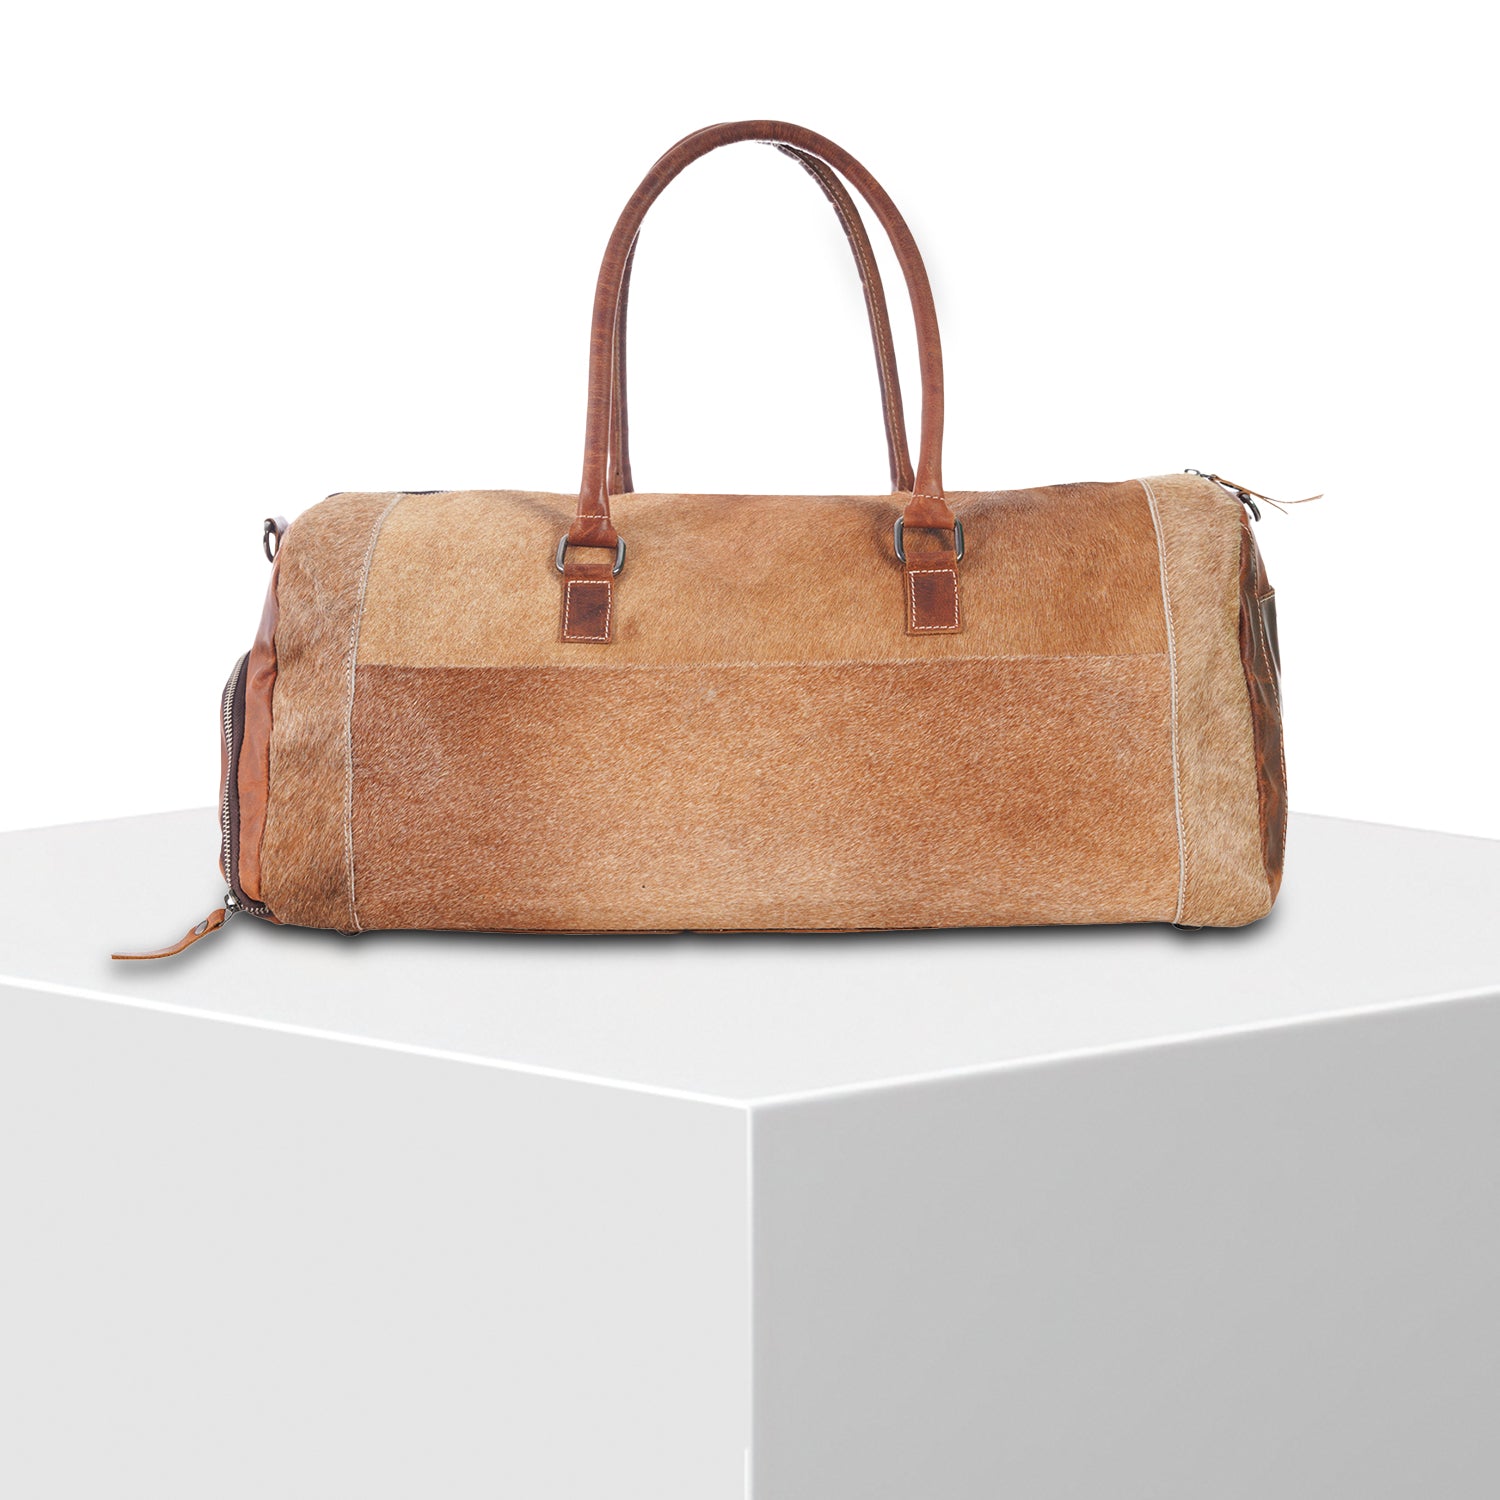 ForestBeast- Hairon Leather Duffle Bag